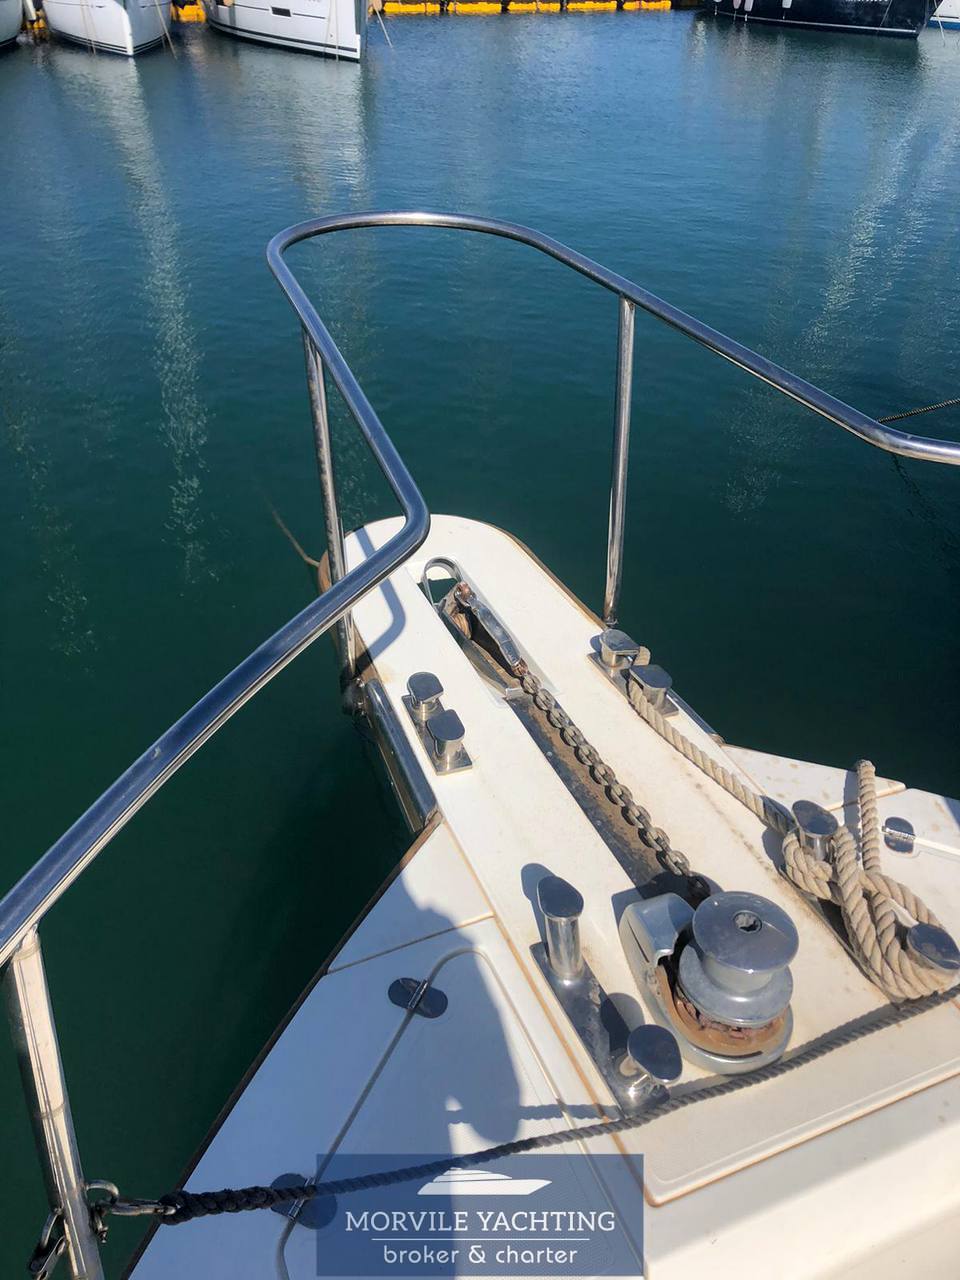 Sciallino S 34 fly Motor boat used for sale